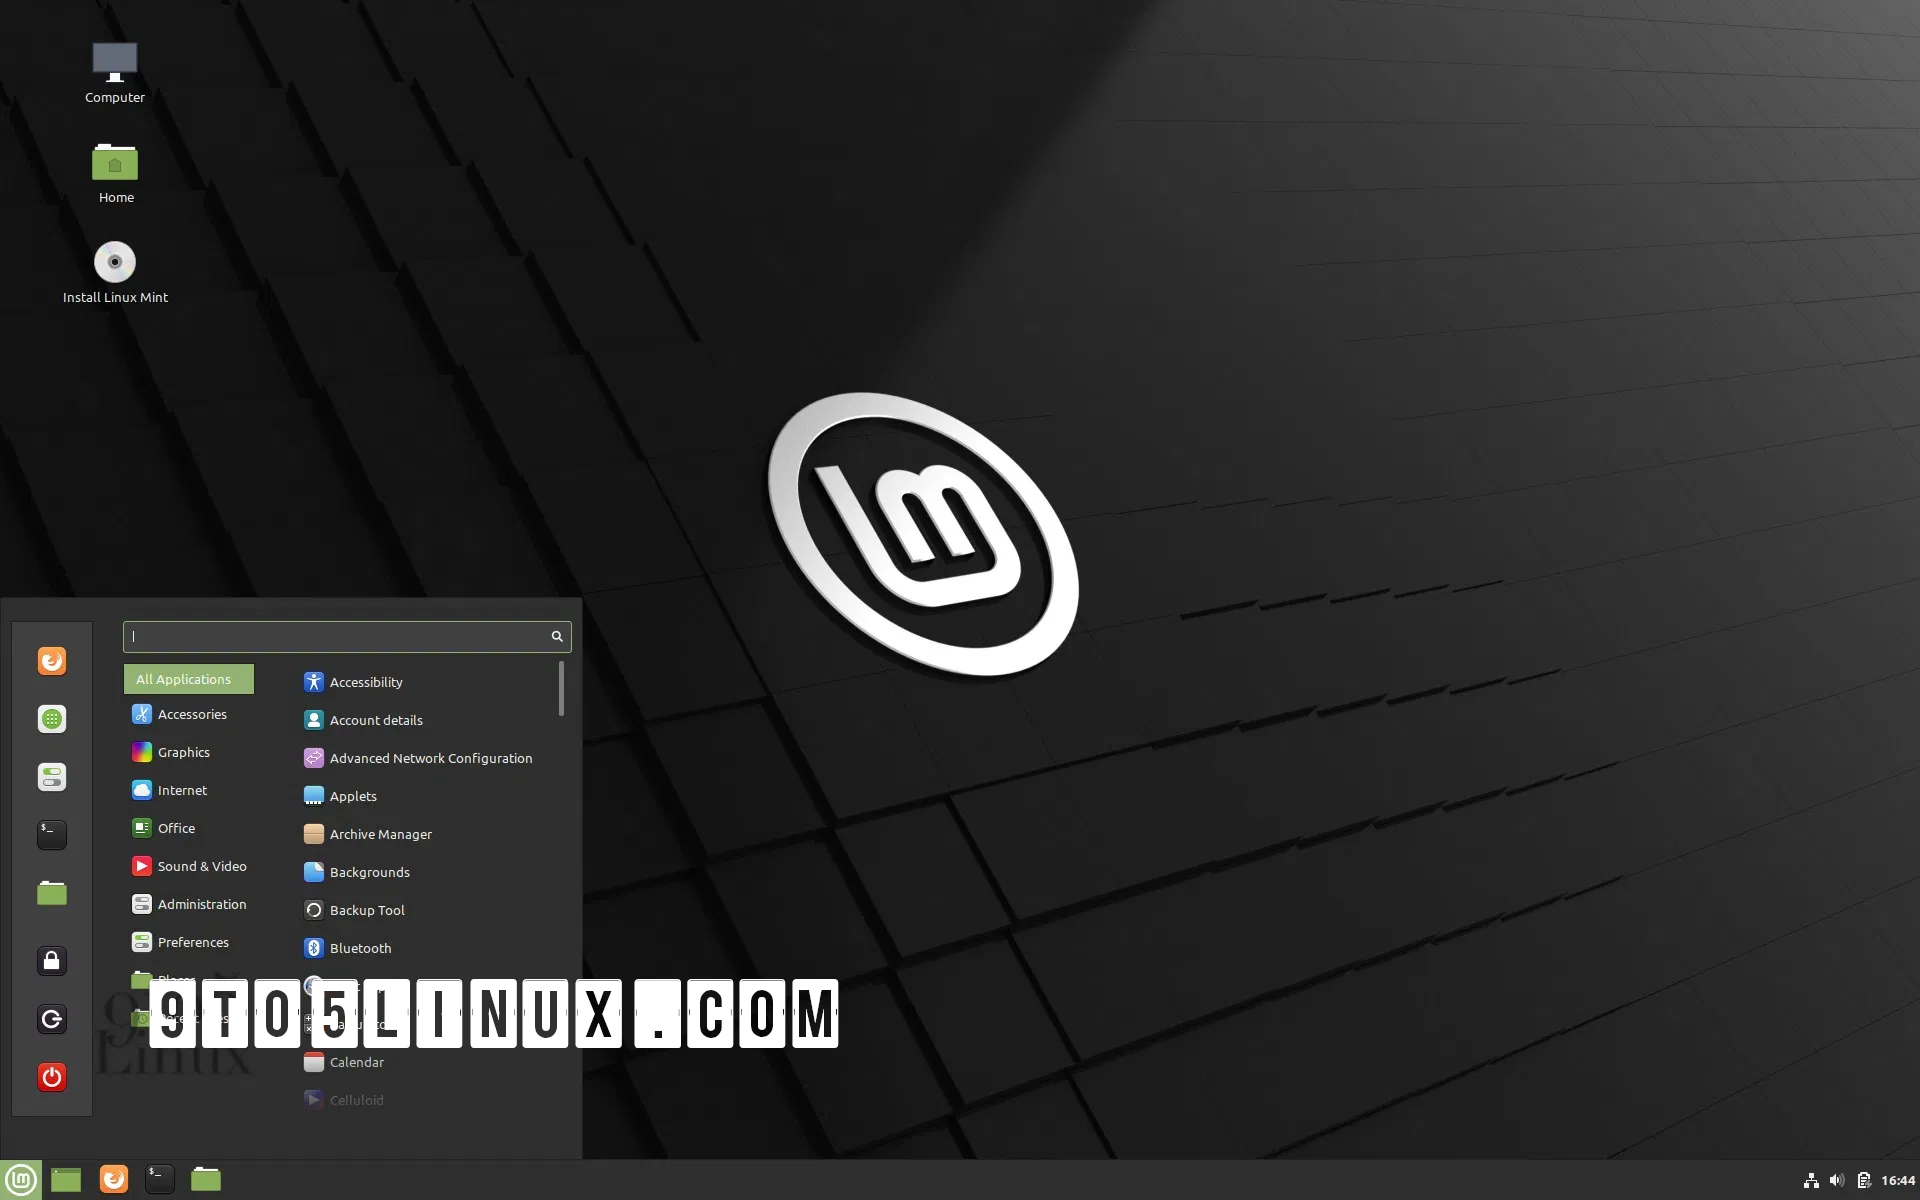 Linux Mint 20.2 “Uma” Announced with New Bulk Renaming App, Beta Is Coming Mid-June